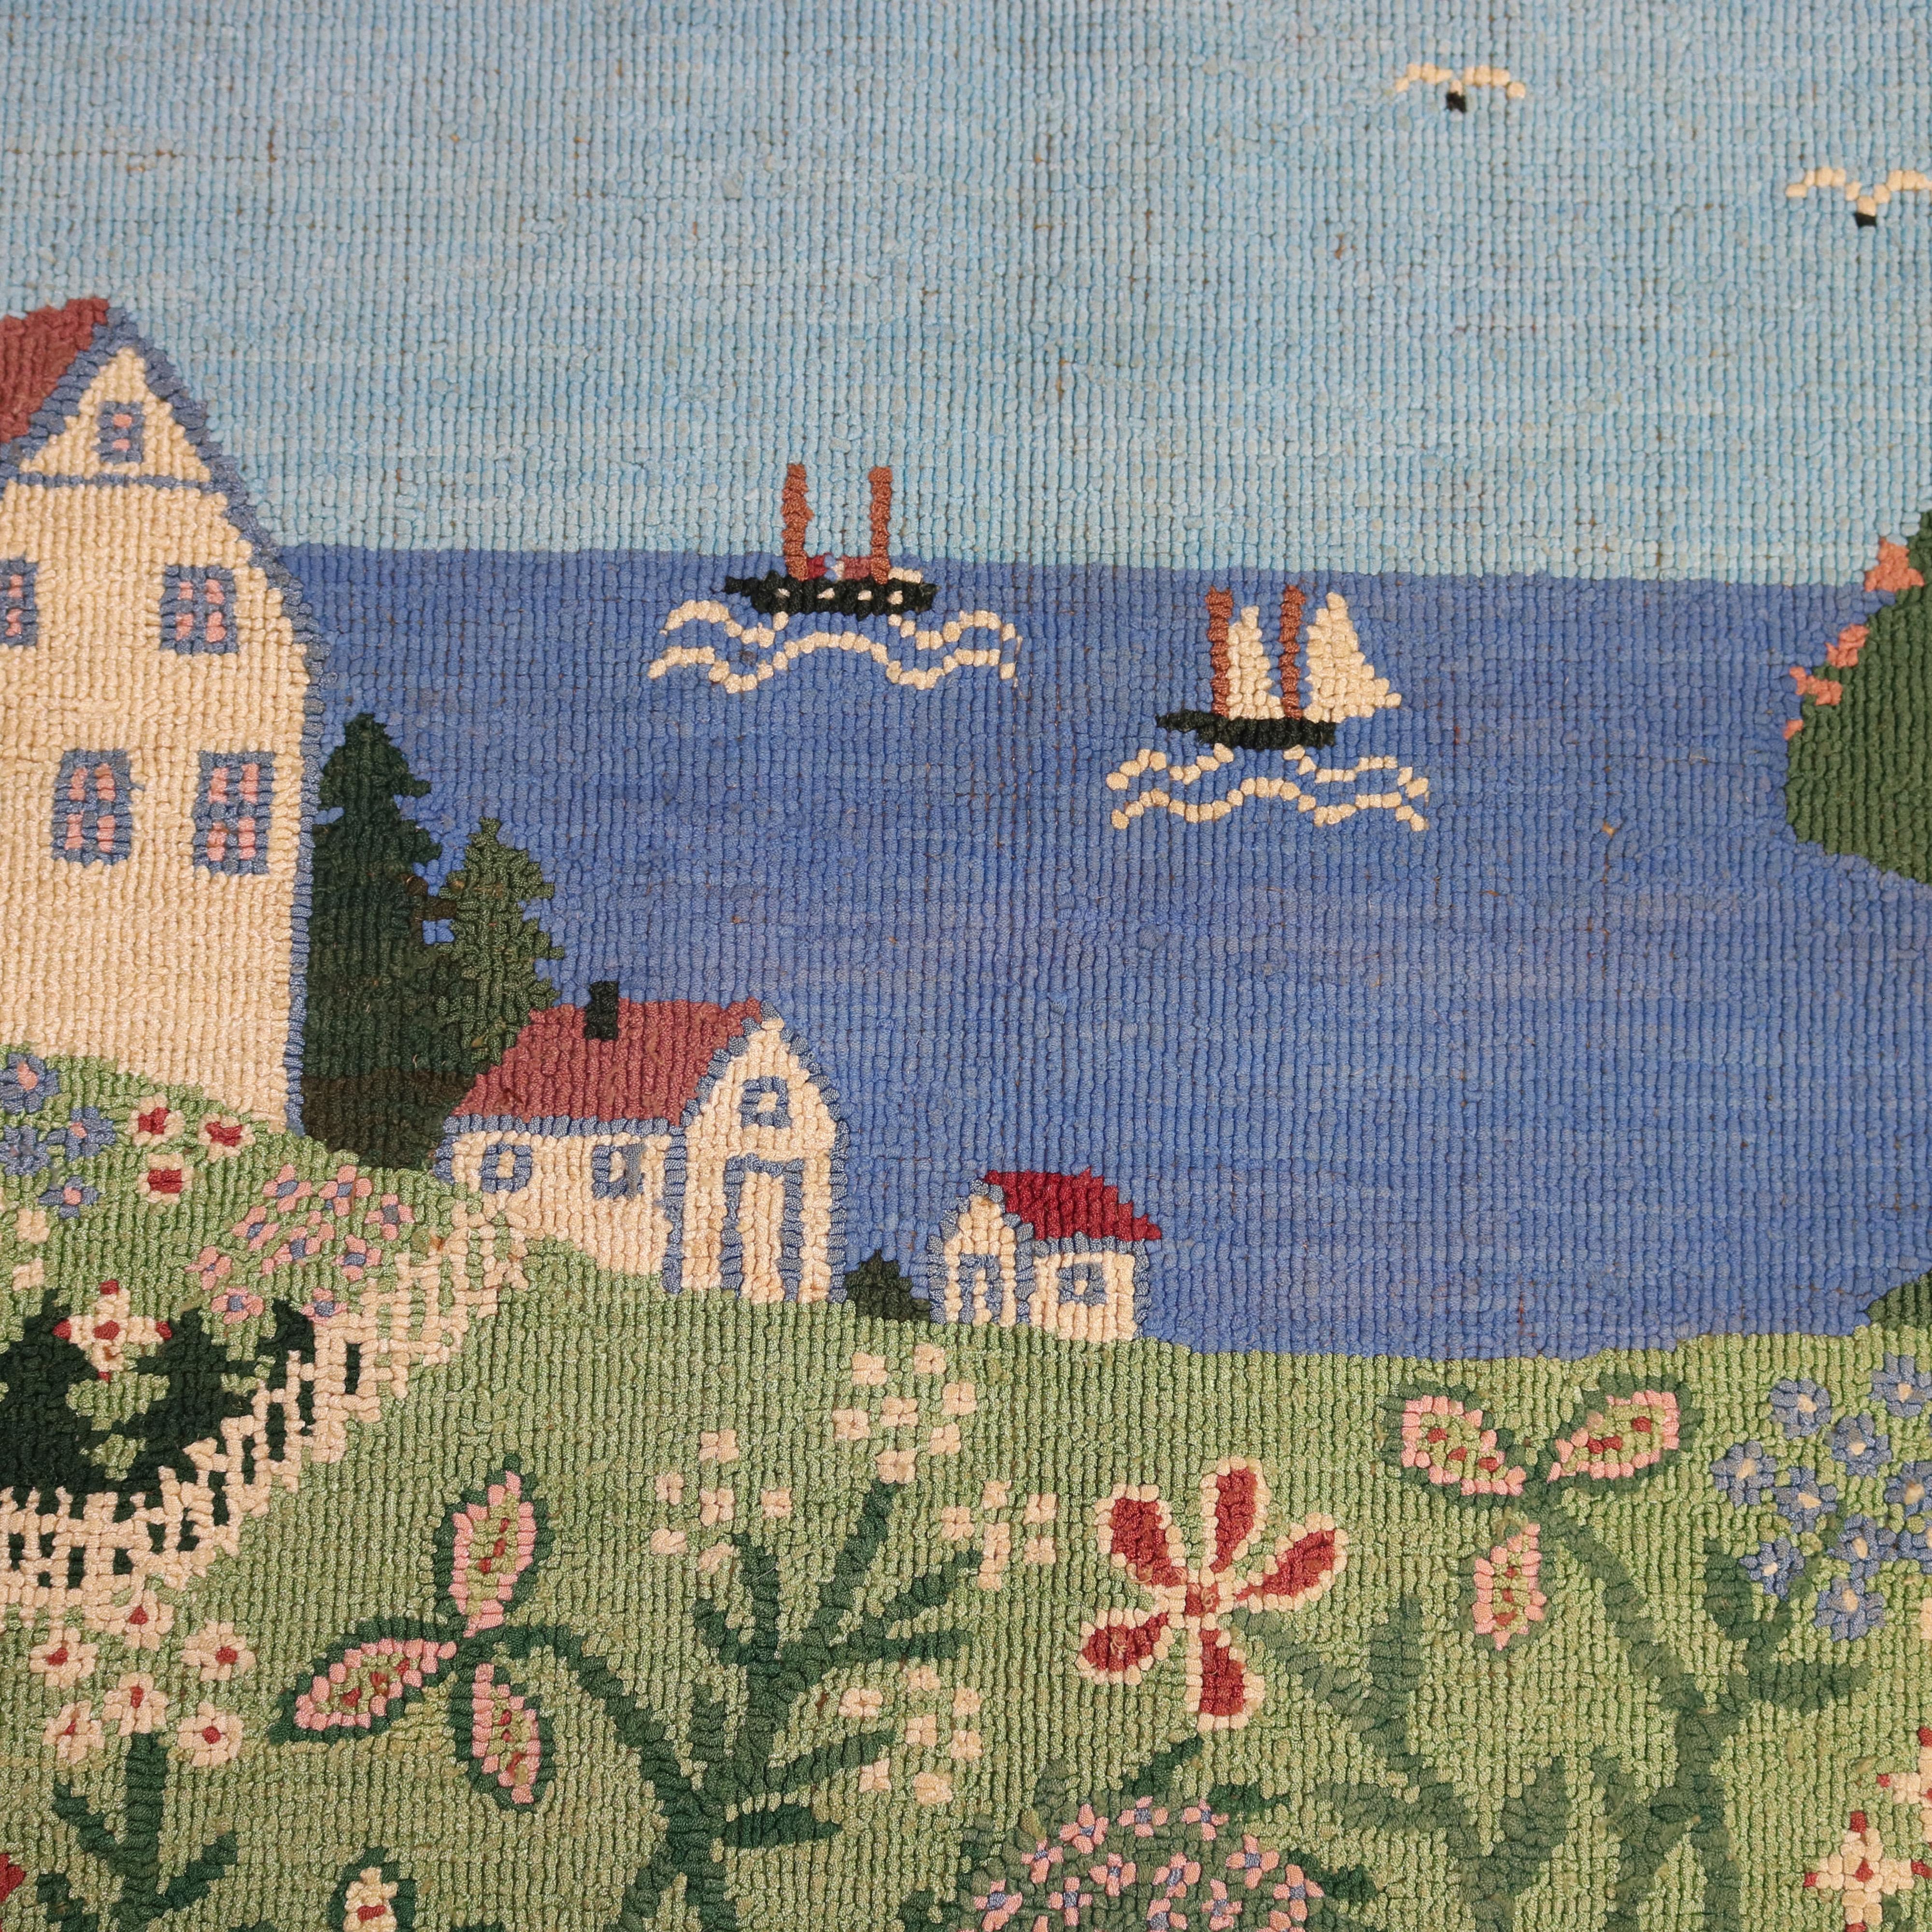 A vintage Newfoundland Grenfell Labrador hand hooked area rug offers scenic view of village and harbor with structures, flowers, boats and birds, 20th century

Measures- 18